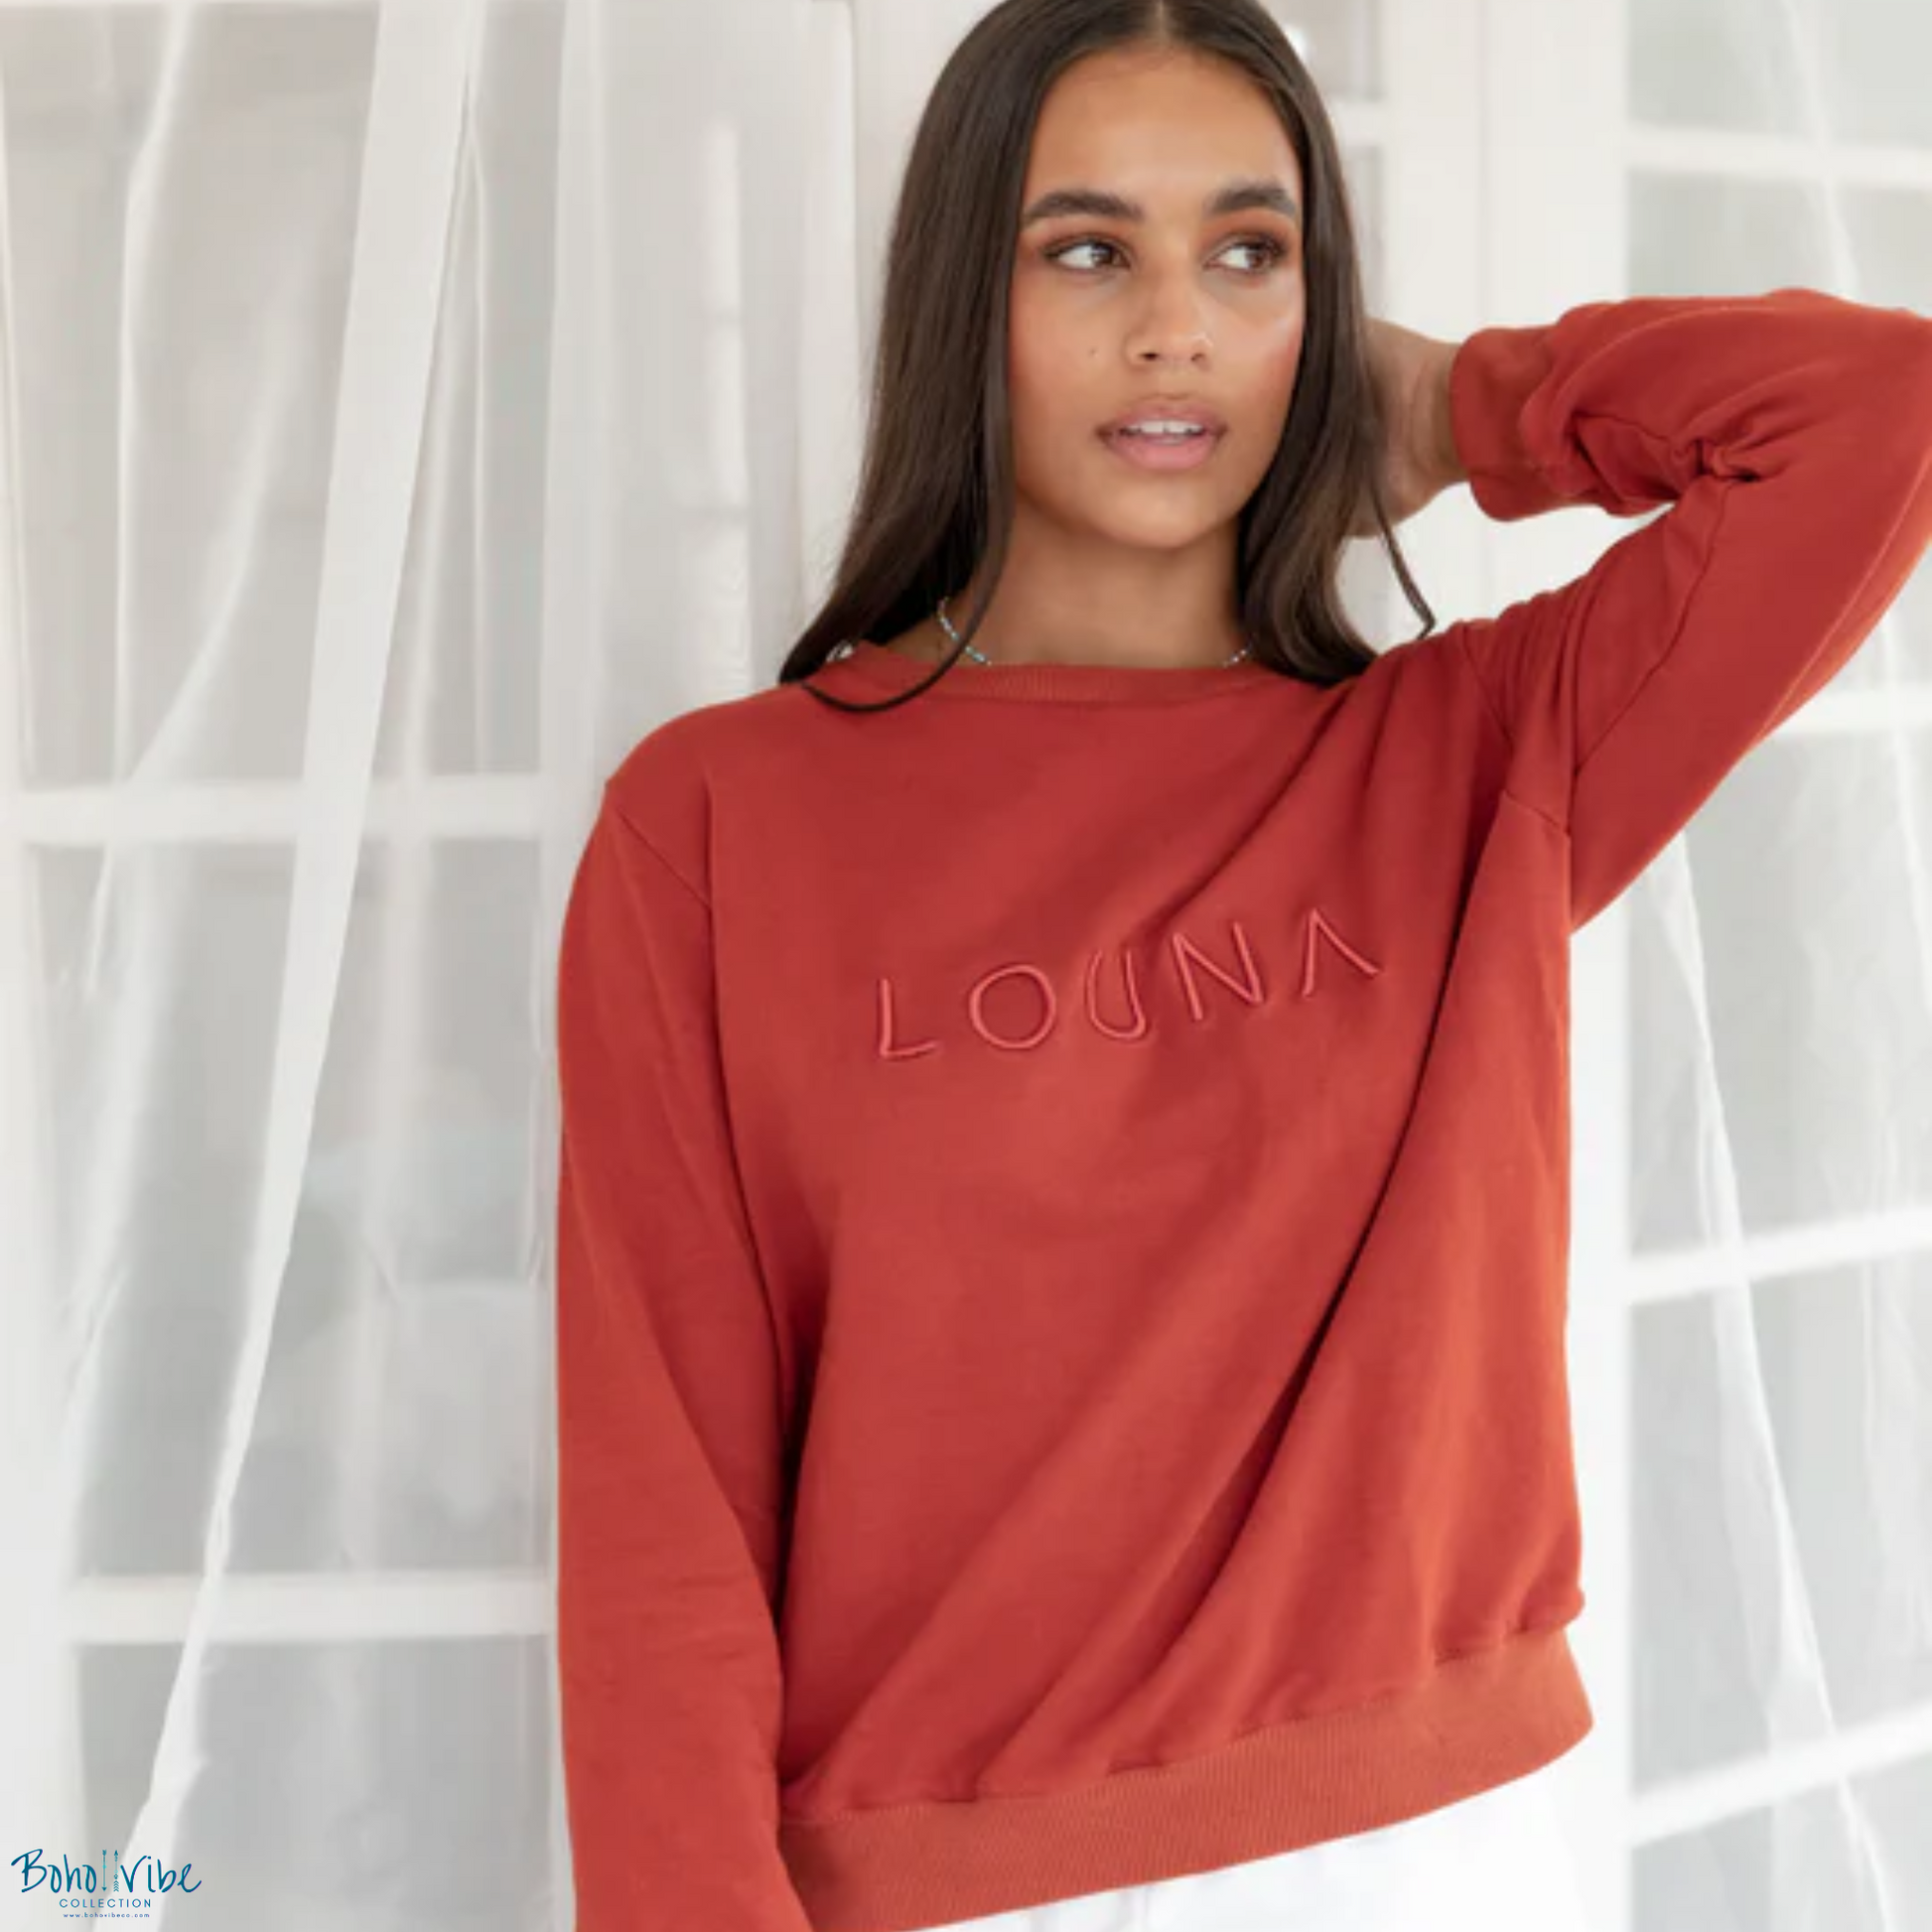 Boho ↡↟ Vibe Collection ↠ Bamboo Fleece Blend Cozy Jumper - The Essential Jumper ↡